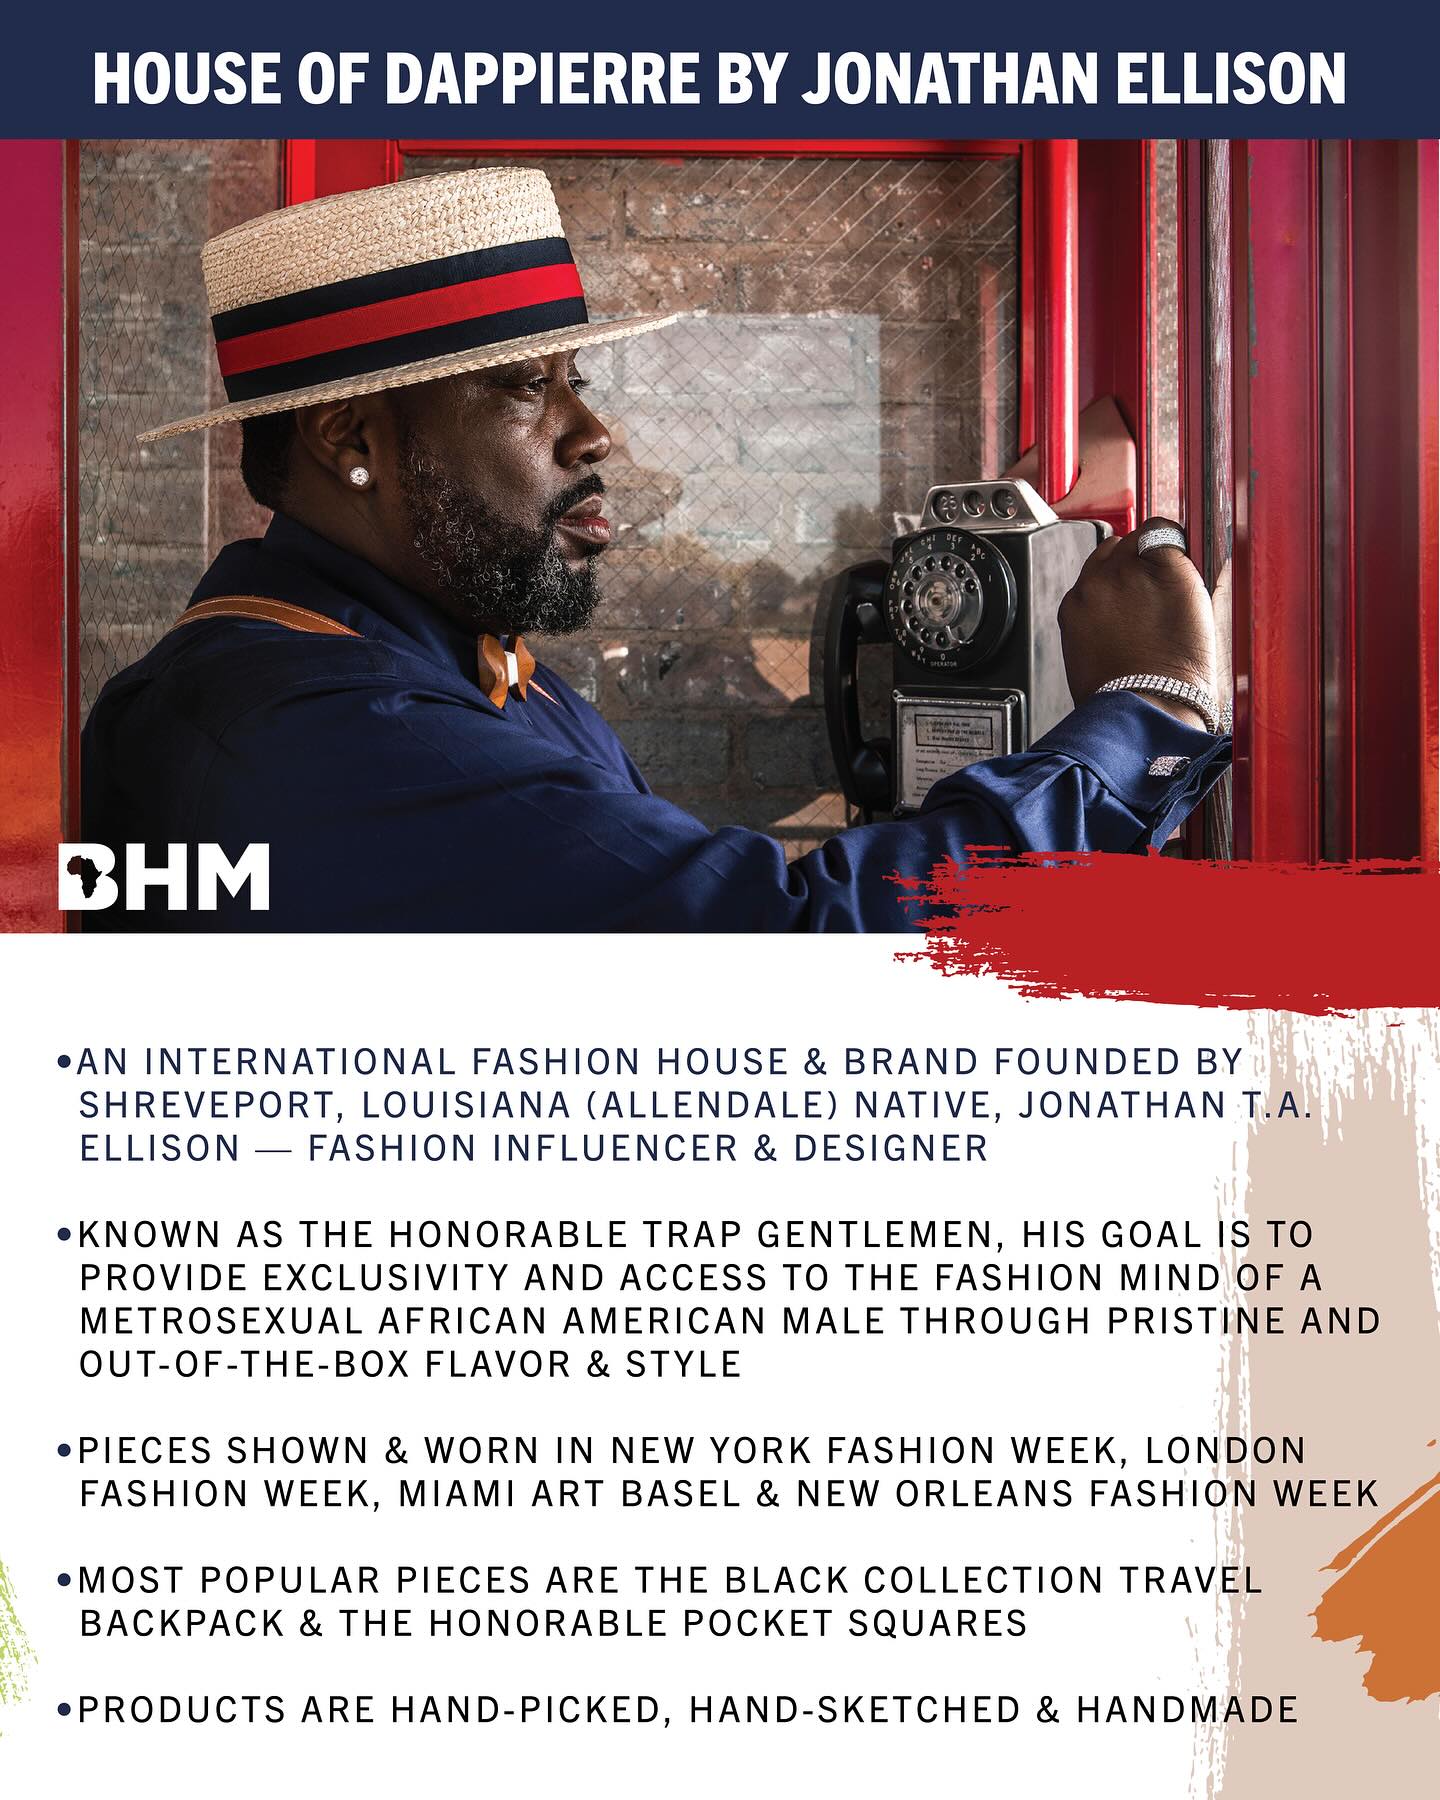 House of Dappierre Launches Exclusive Fashion House with Limited Edition Pieces